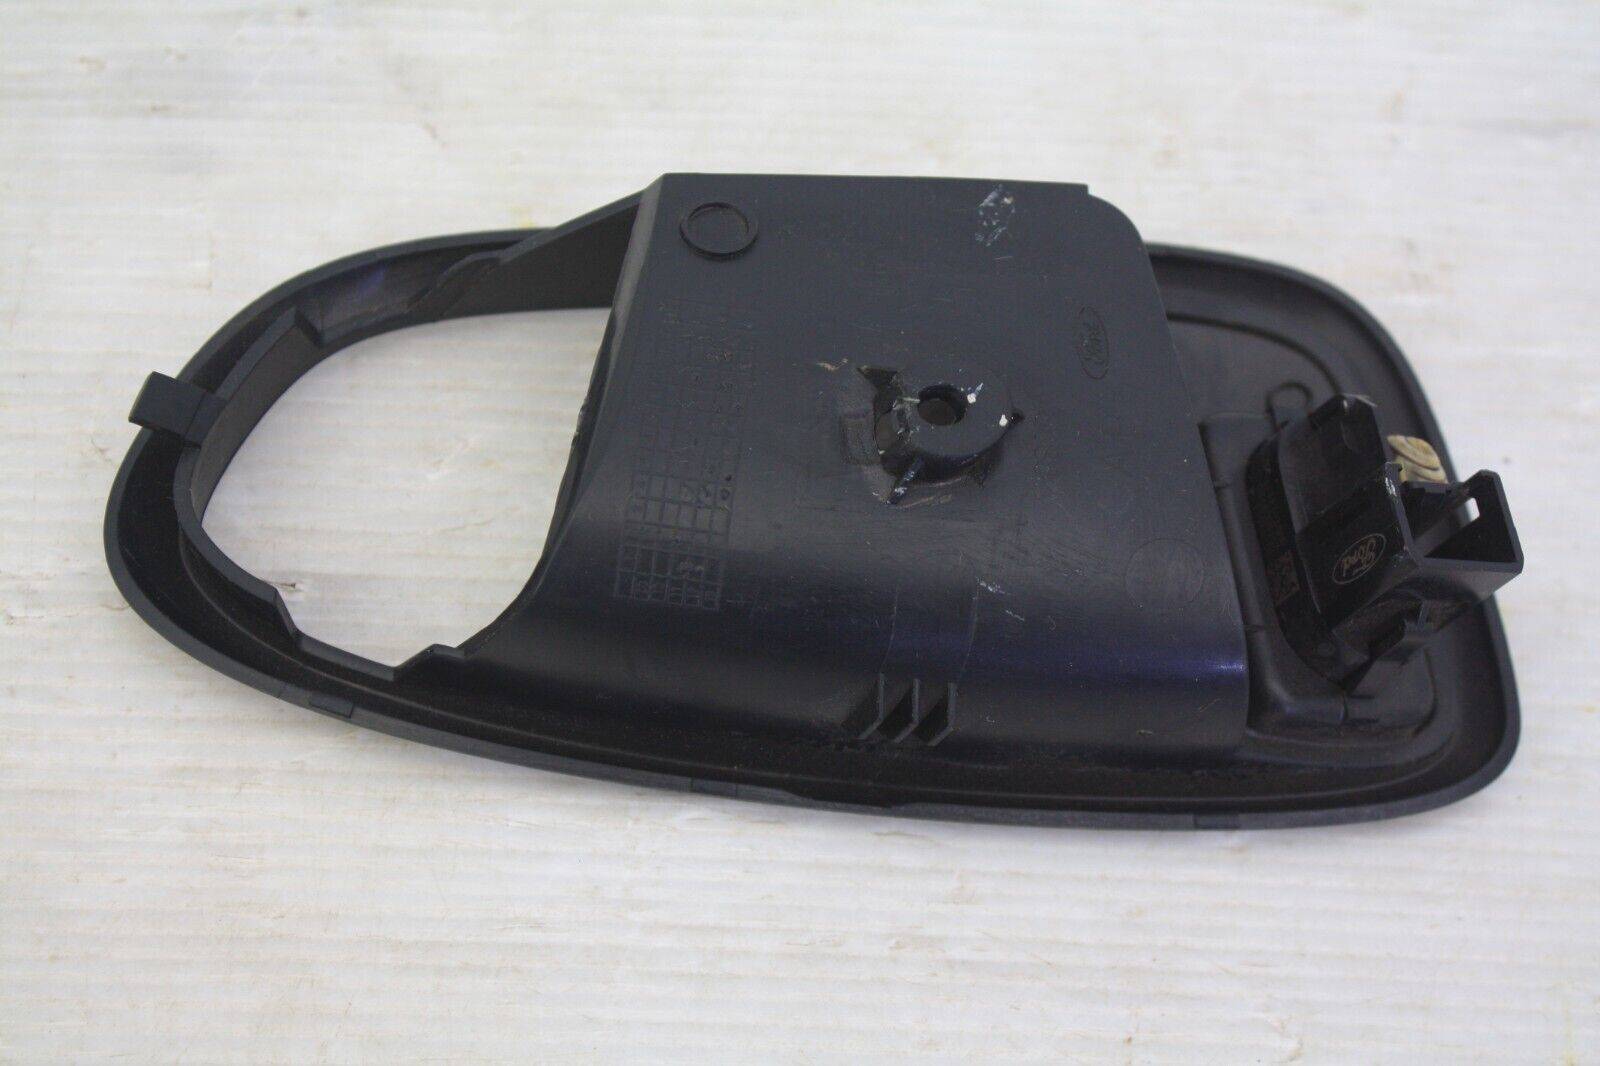 Ford-S-Max-Front-Left-Door-Handle-Surround-Trim-2010-to-2015-6M21-U226A37-BCW-176008398752-5